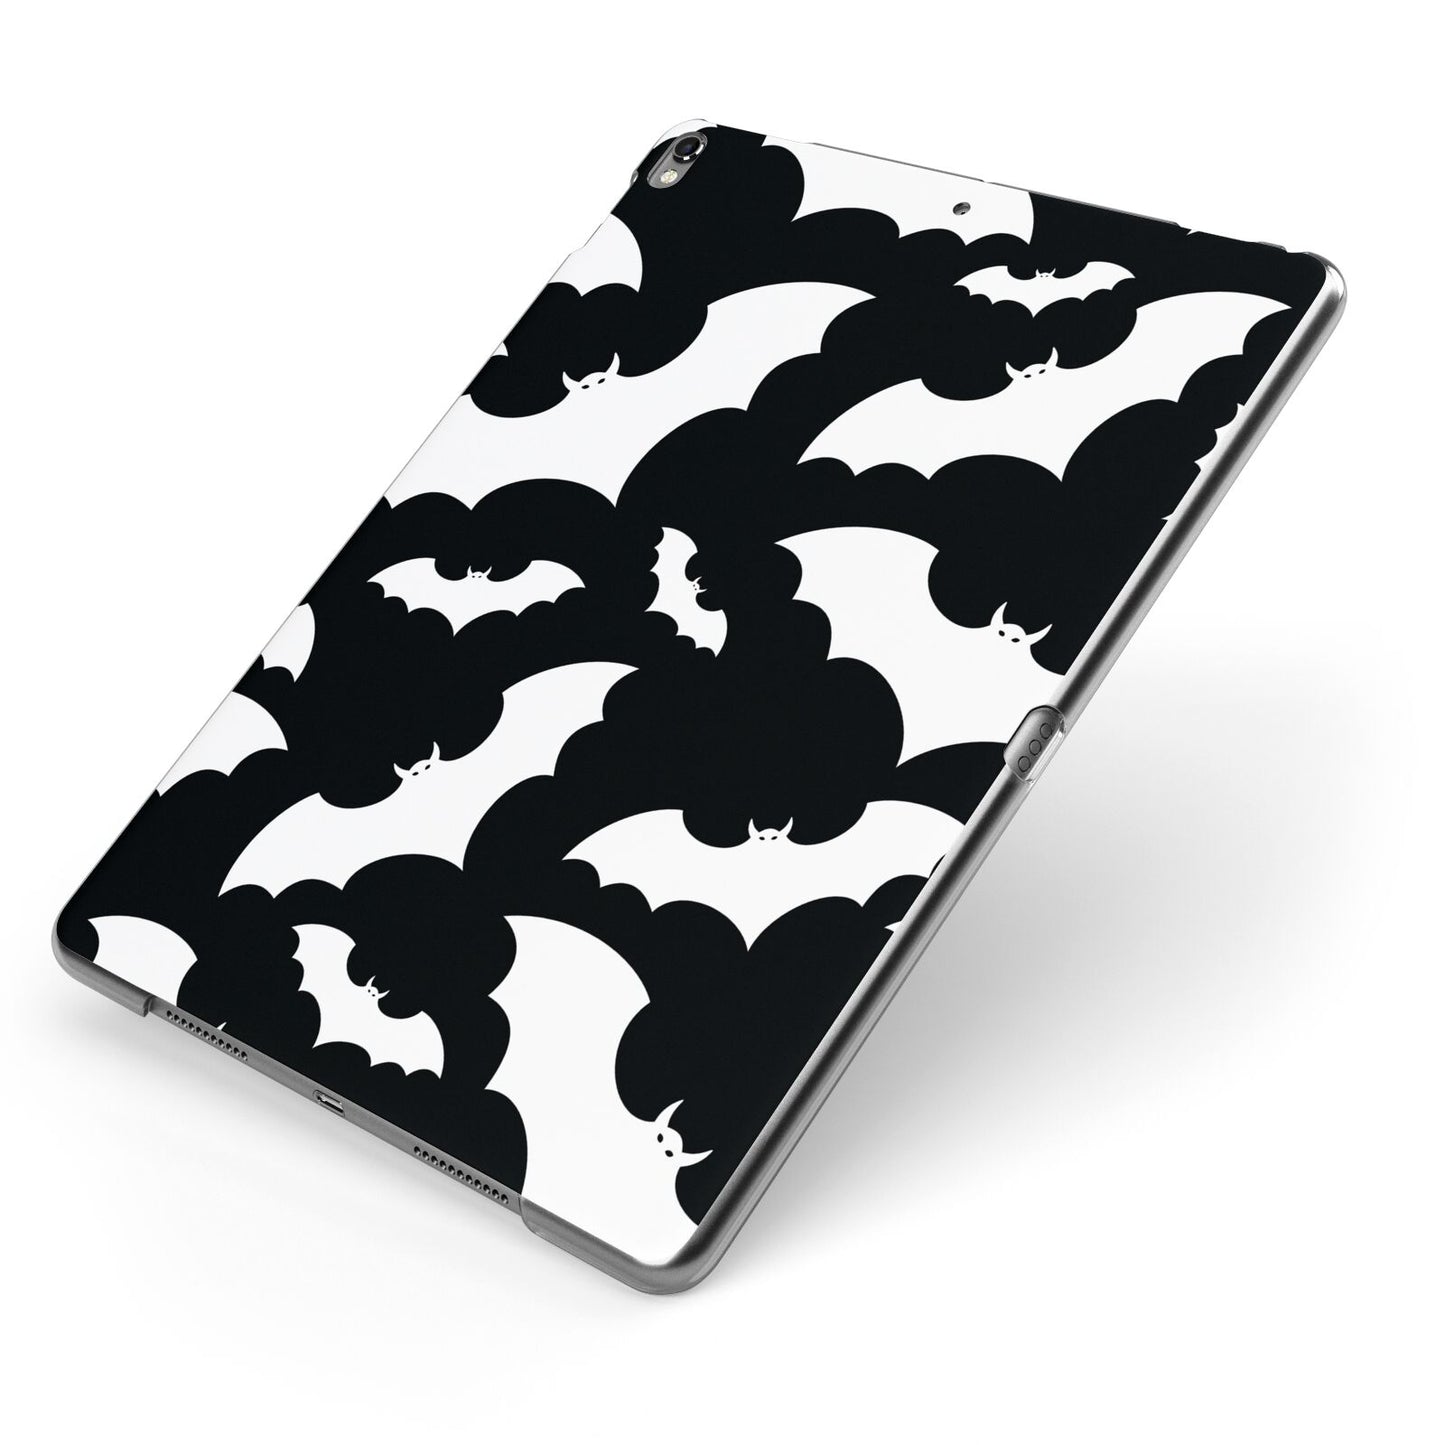 Black and White Bats Apple iPad Case on Grey iPad Side View